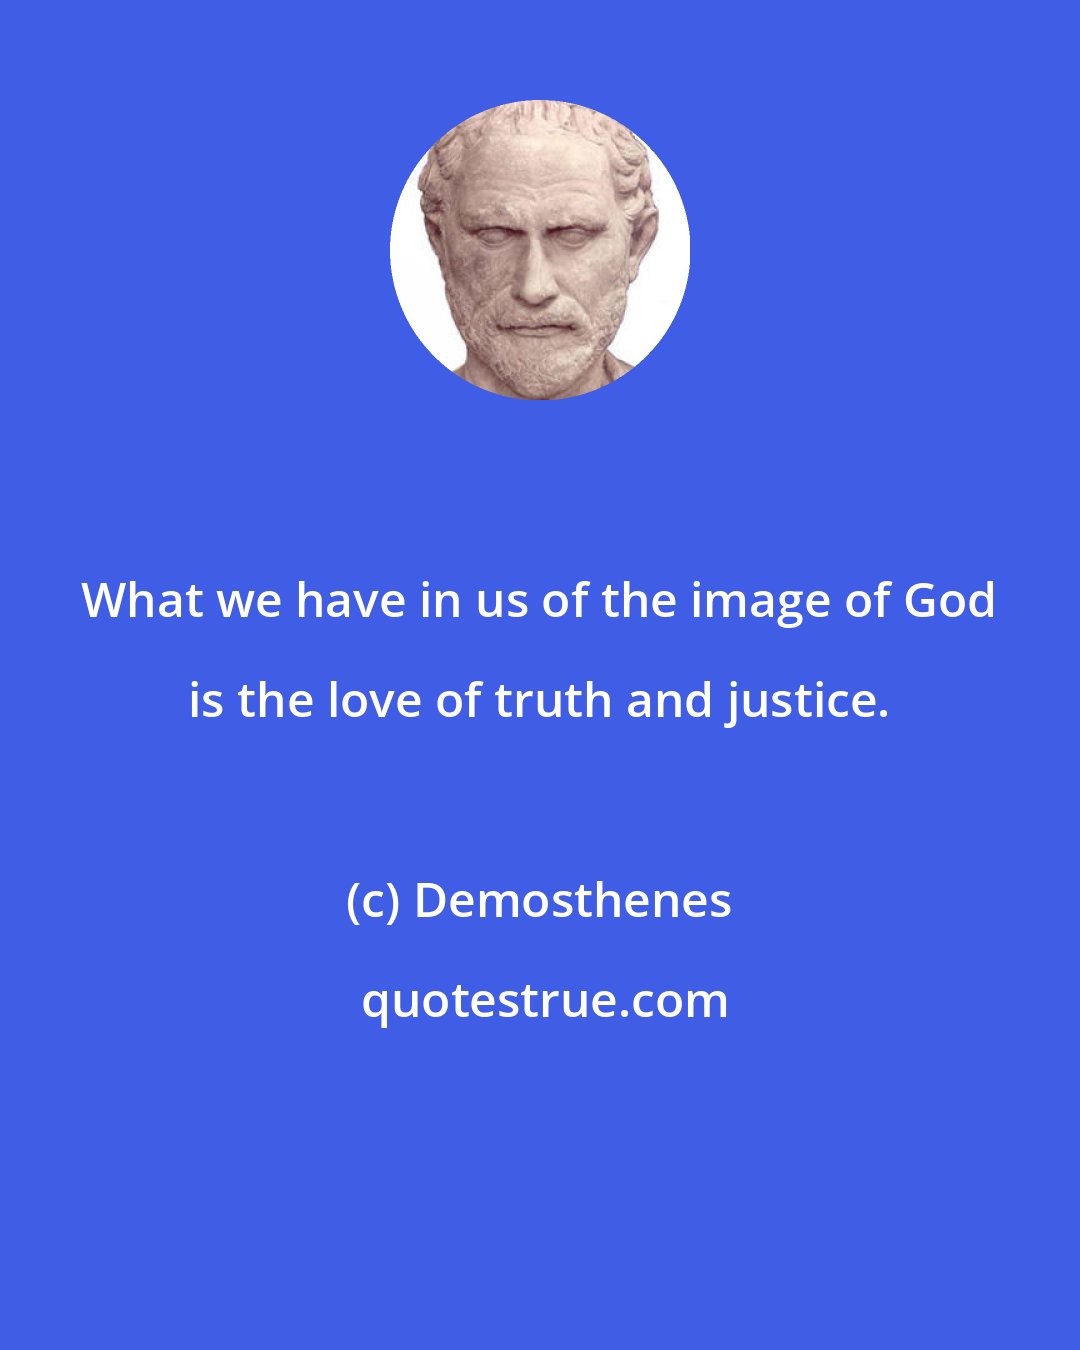 Demosthenes: What we have in us of the image of God is the love of truth and justice.